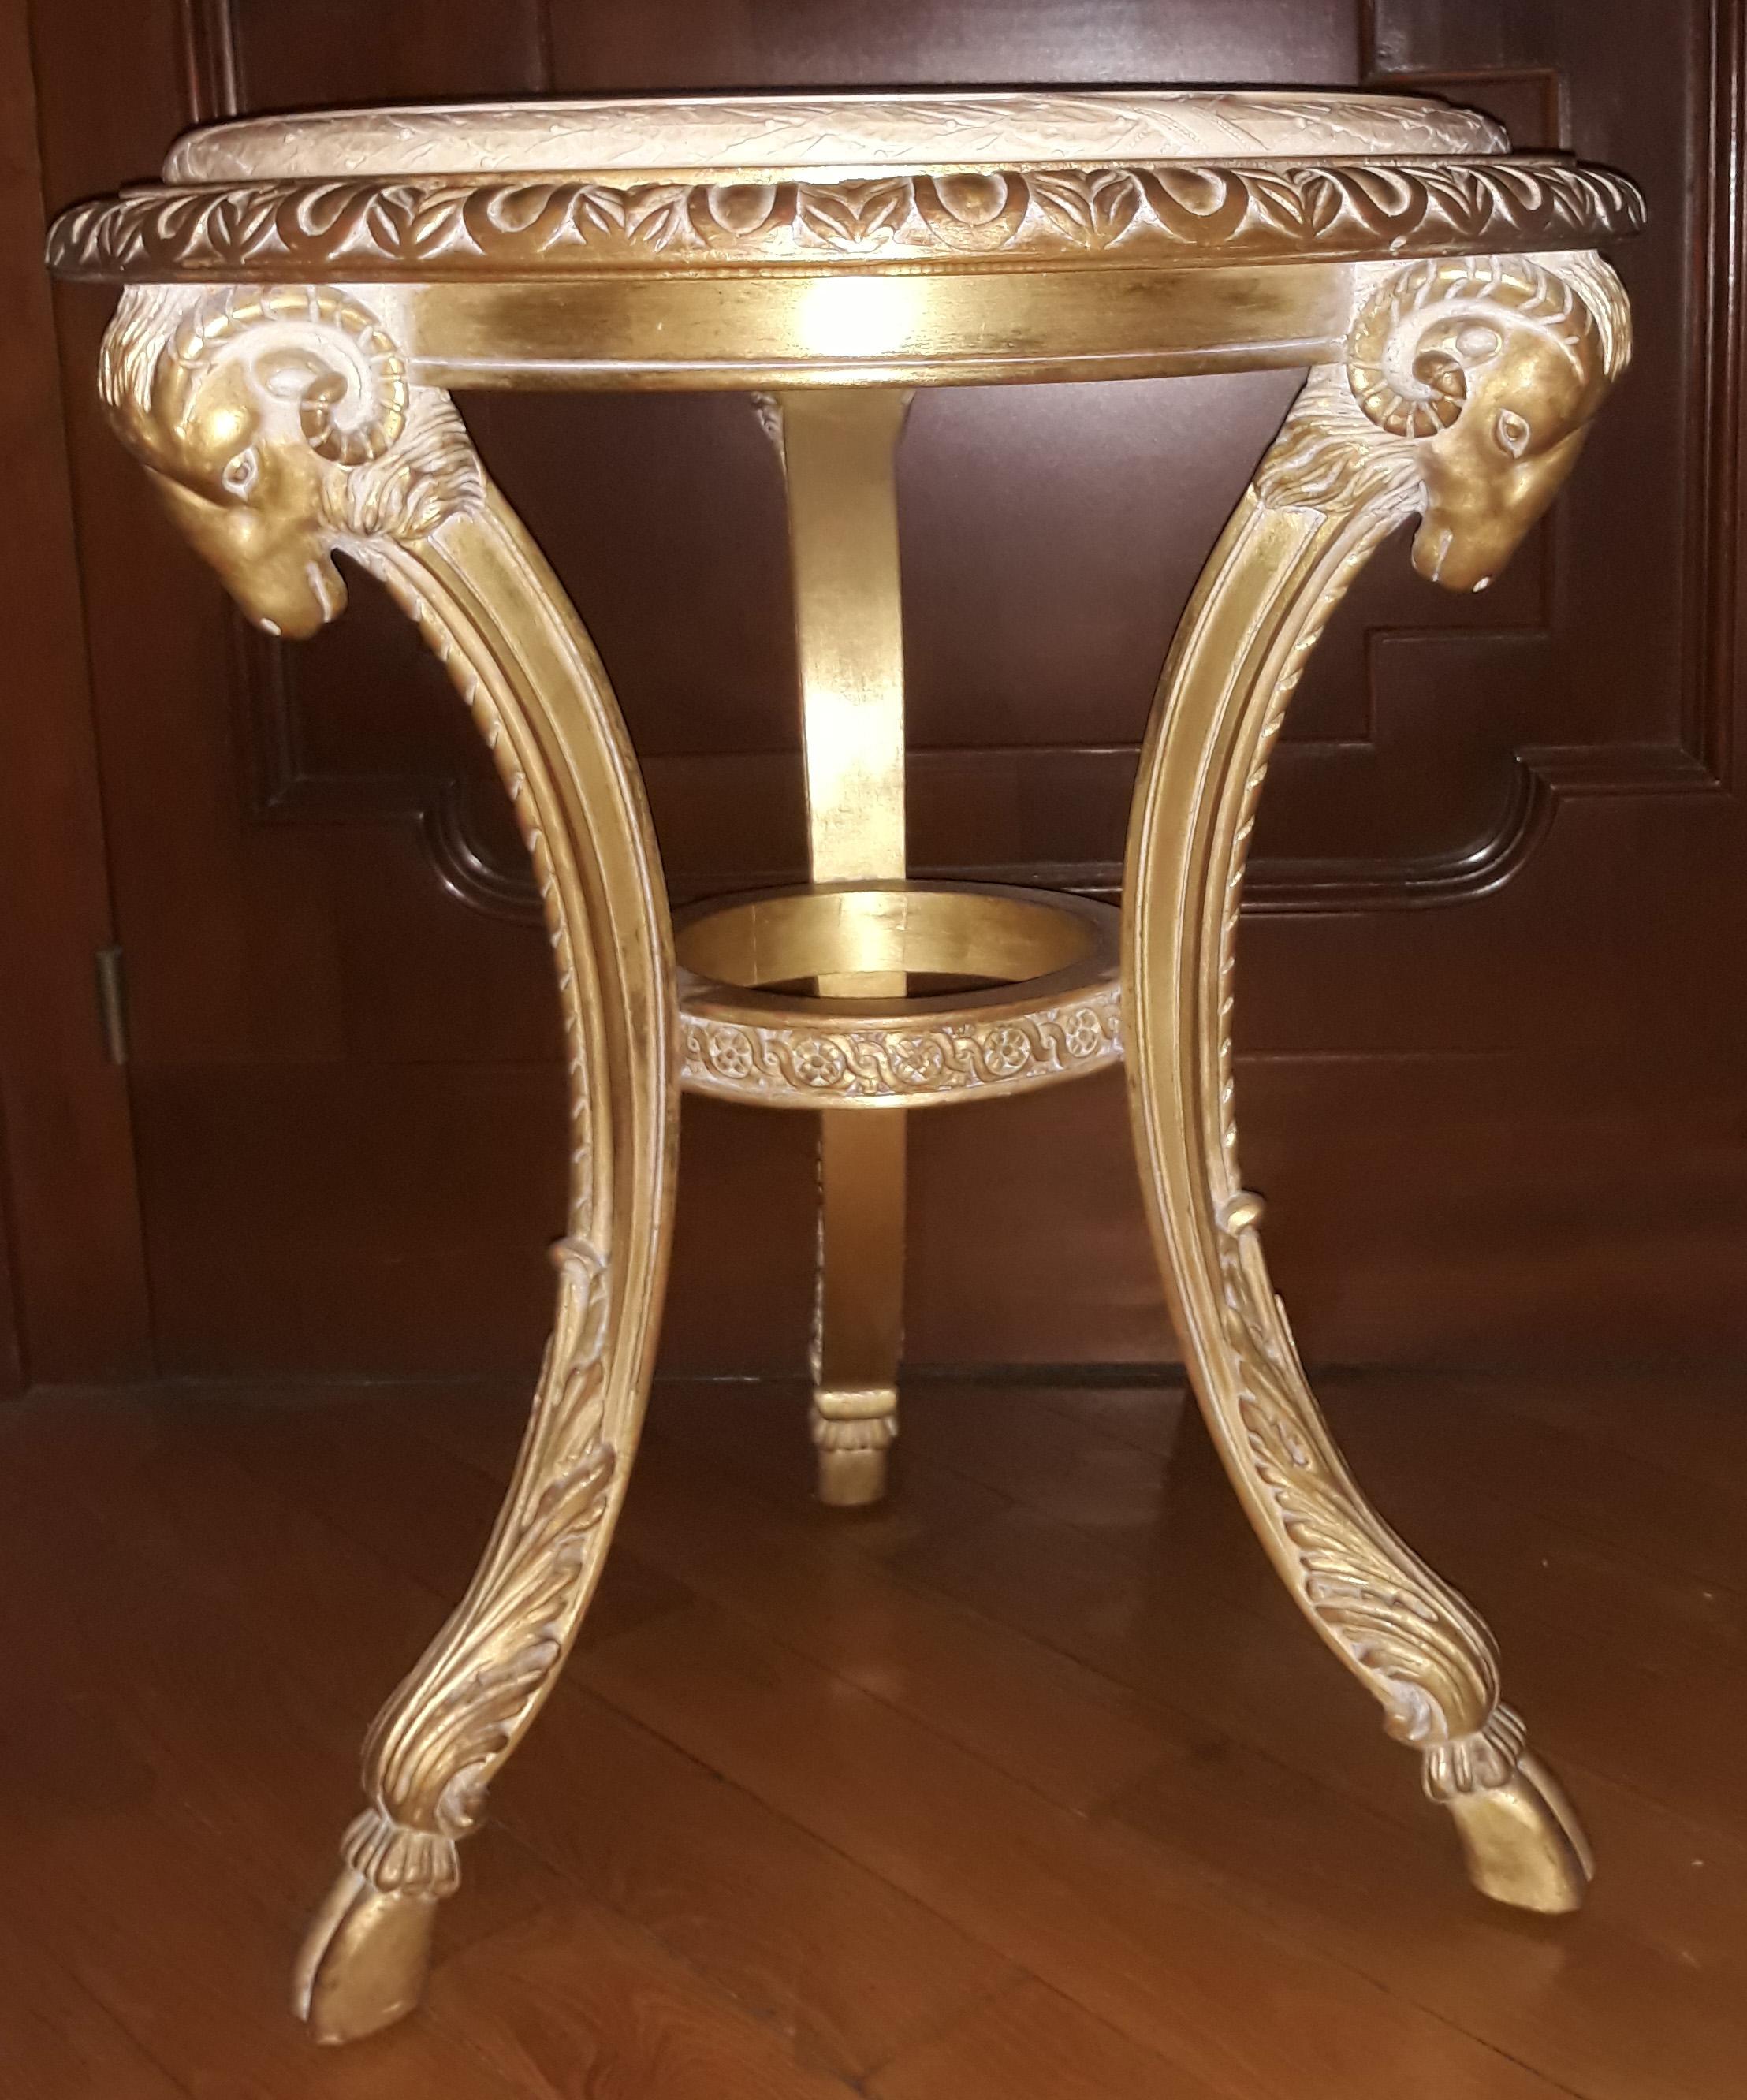 20th century tea table, inspired by the drawings of Filippo Juvarra (Racconigi Royal Palace 1753)
Scagliola top and marmorino decorations 800, decorations with figures of rams and legs carved in the shape of a plinth. Antique gold leaf